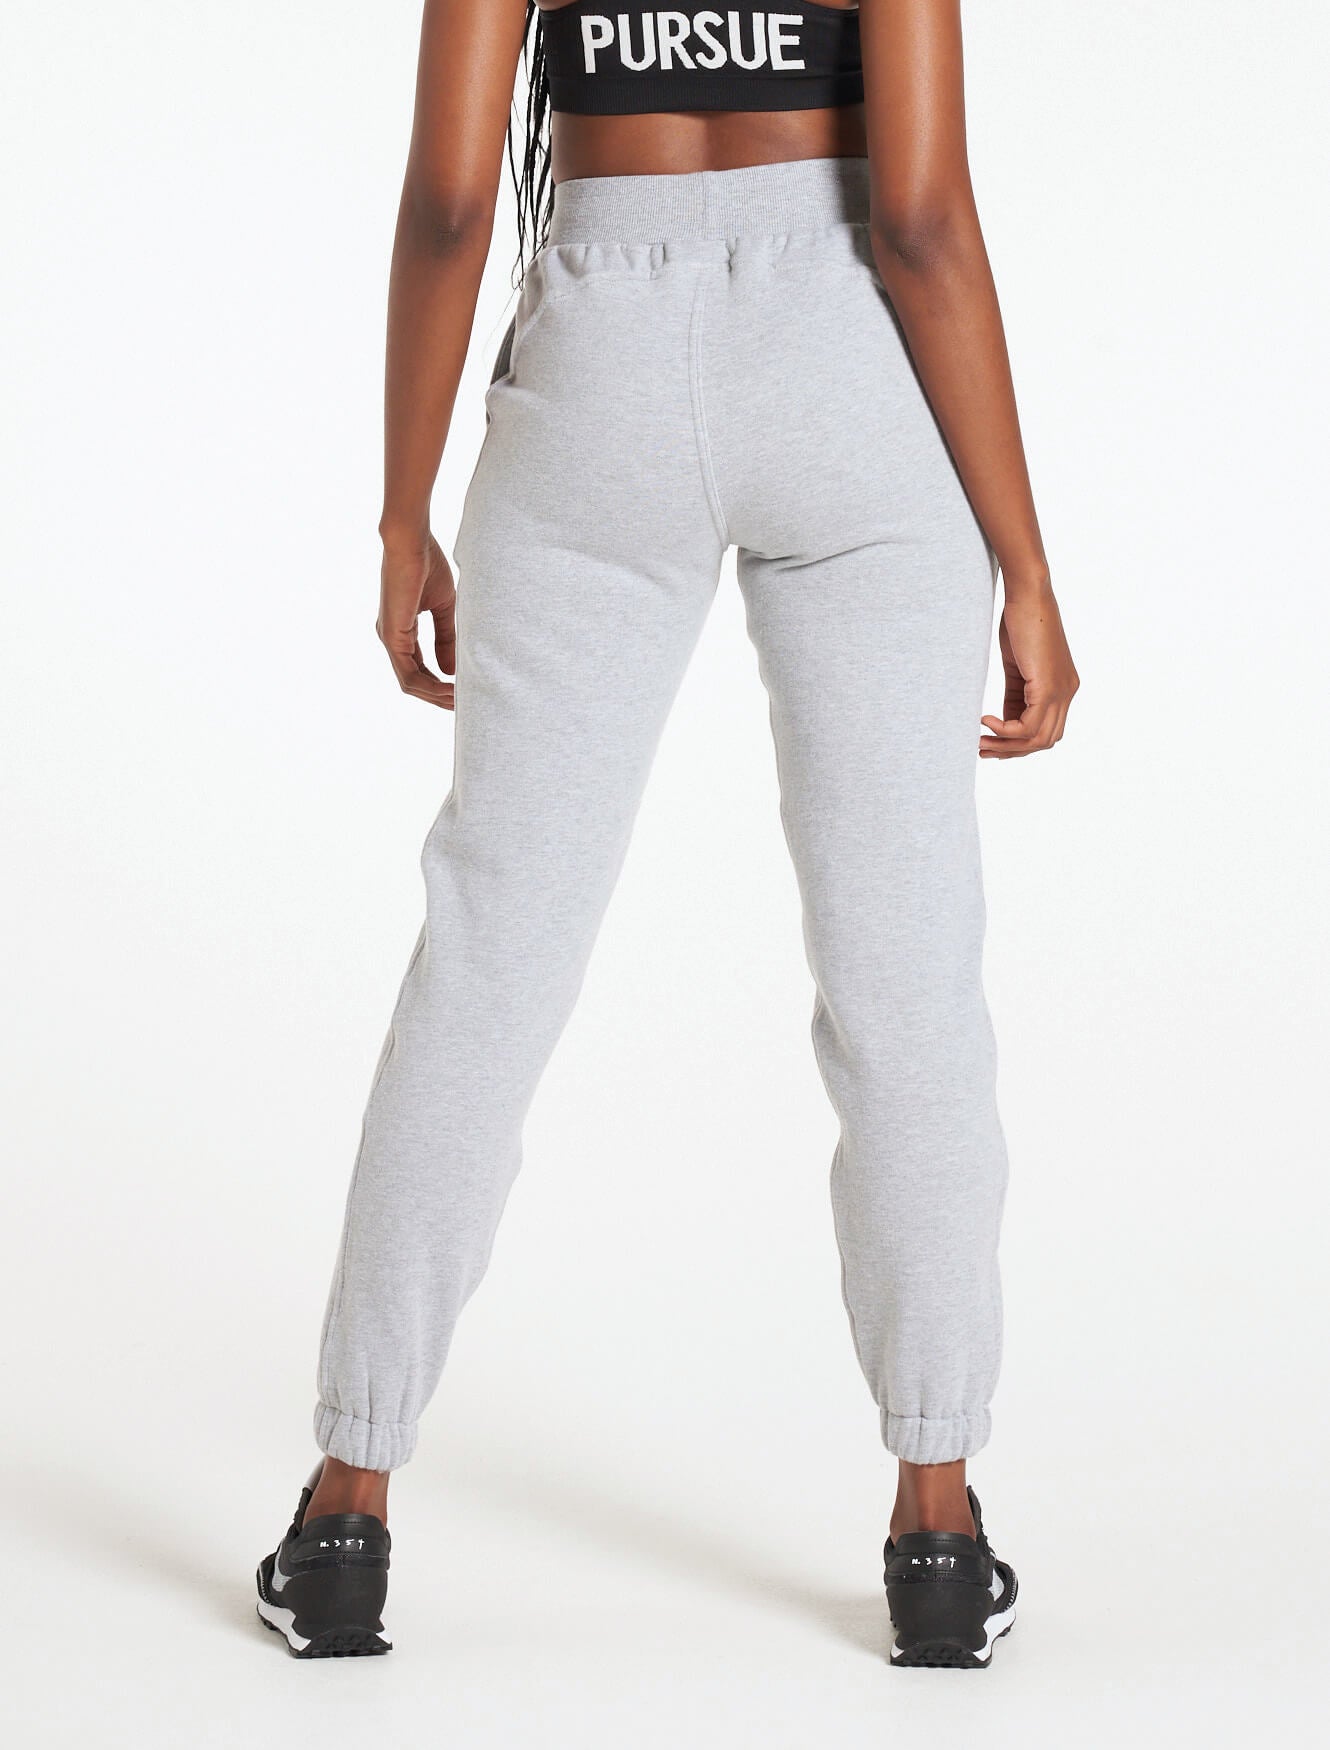 Select Bottoms / Grey Marl Pursue Fitness 2